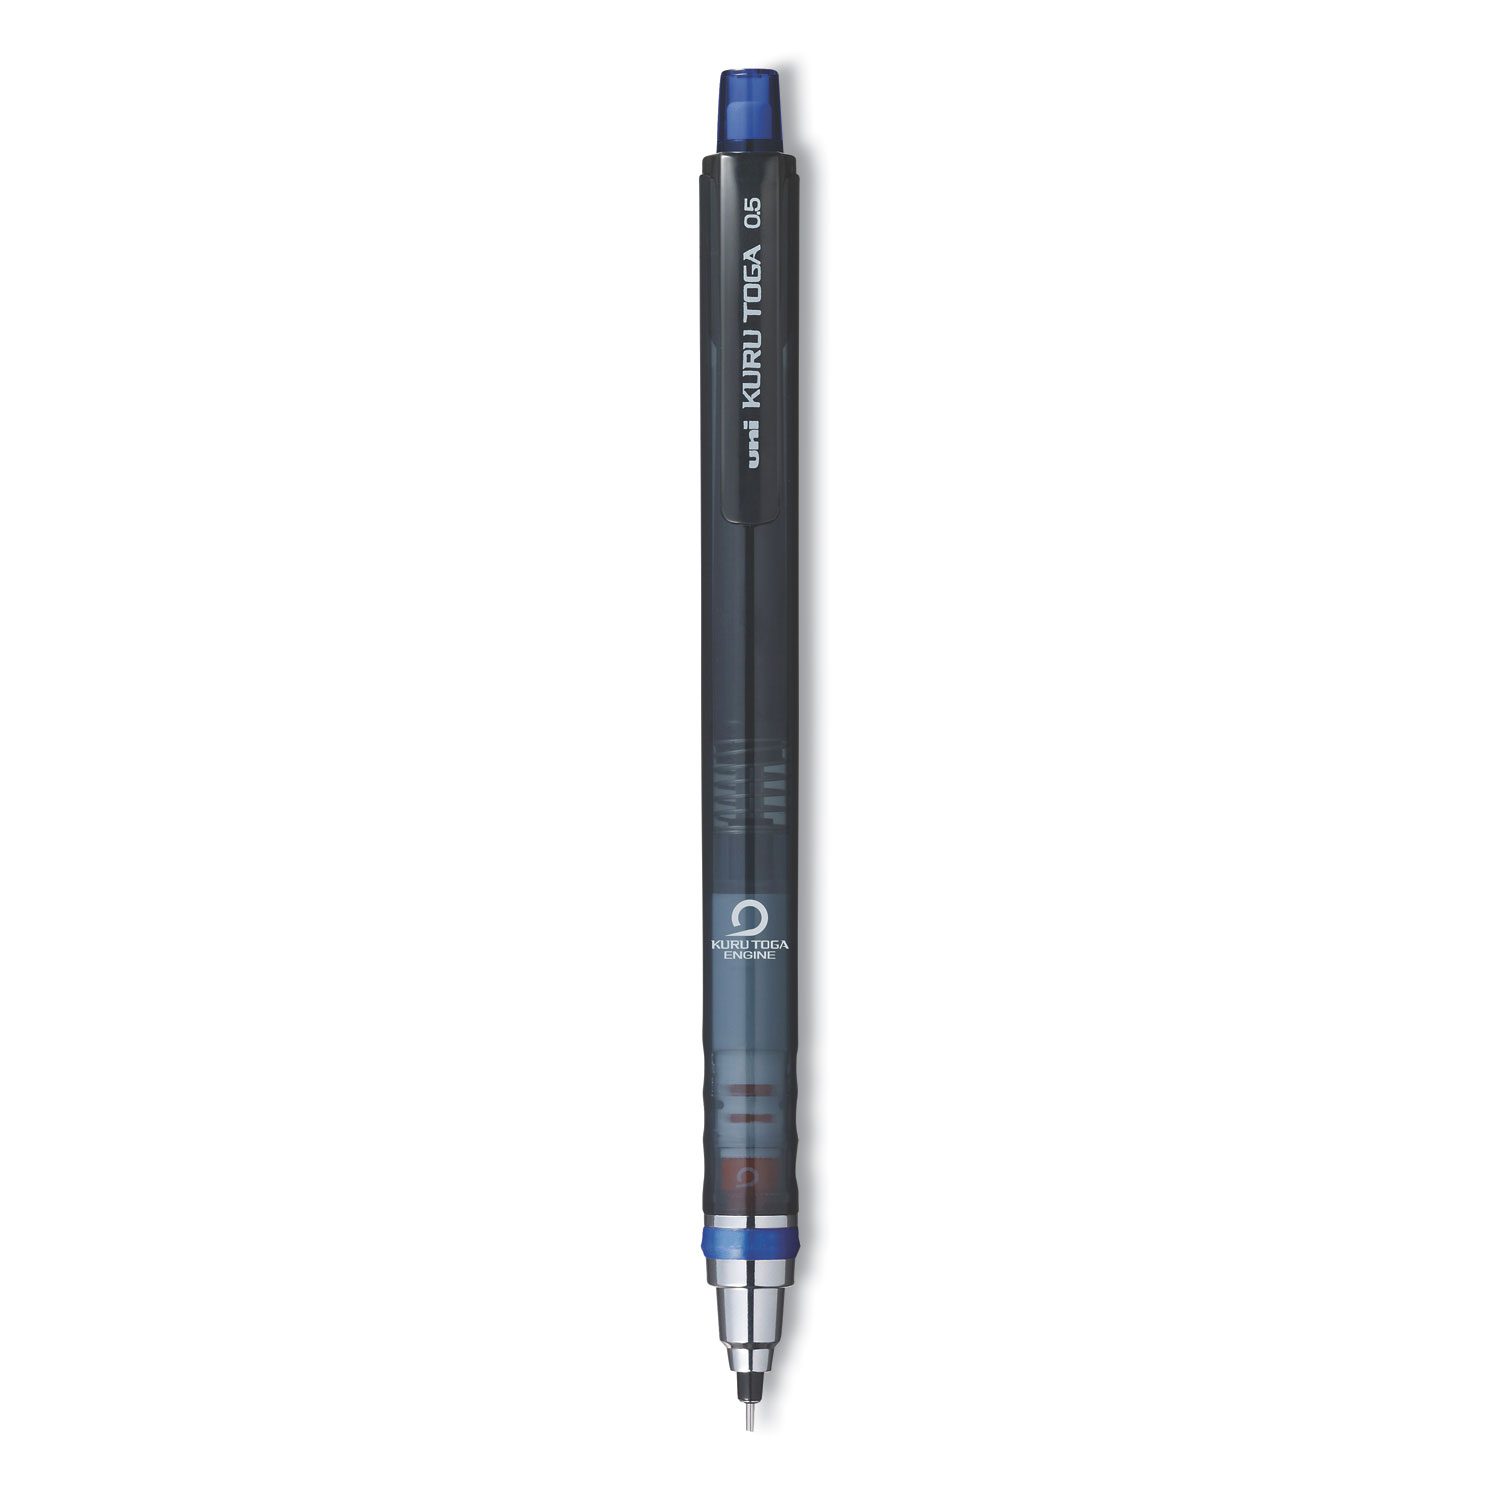  uni-ball Kuru Toga Mechanical Pencil with 0.7 mm Lead Refills  & Pencil Erasers, HB #2 : Office Products